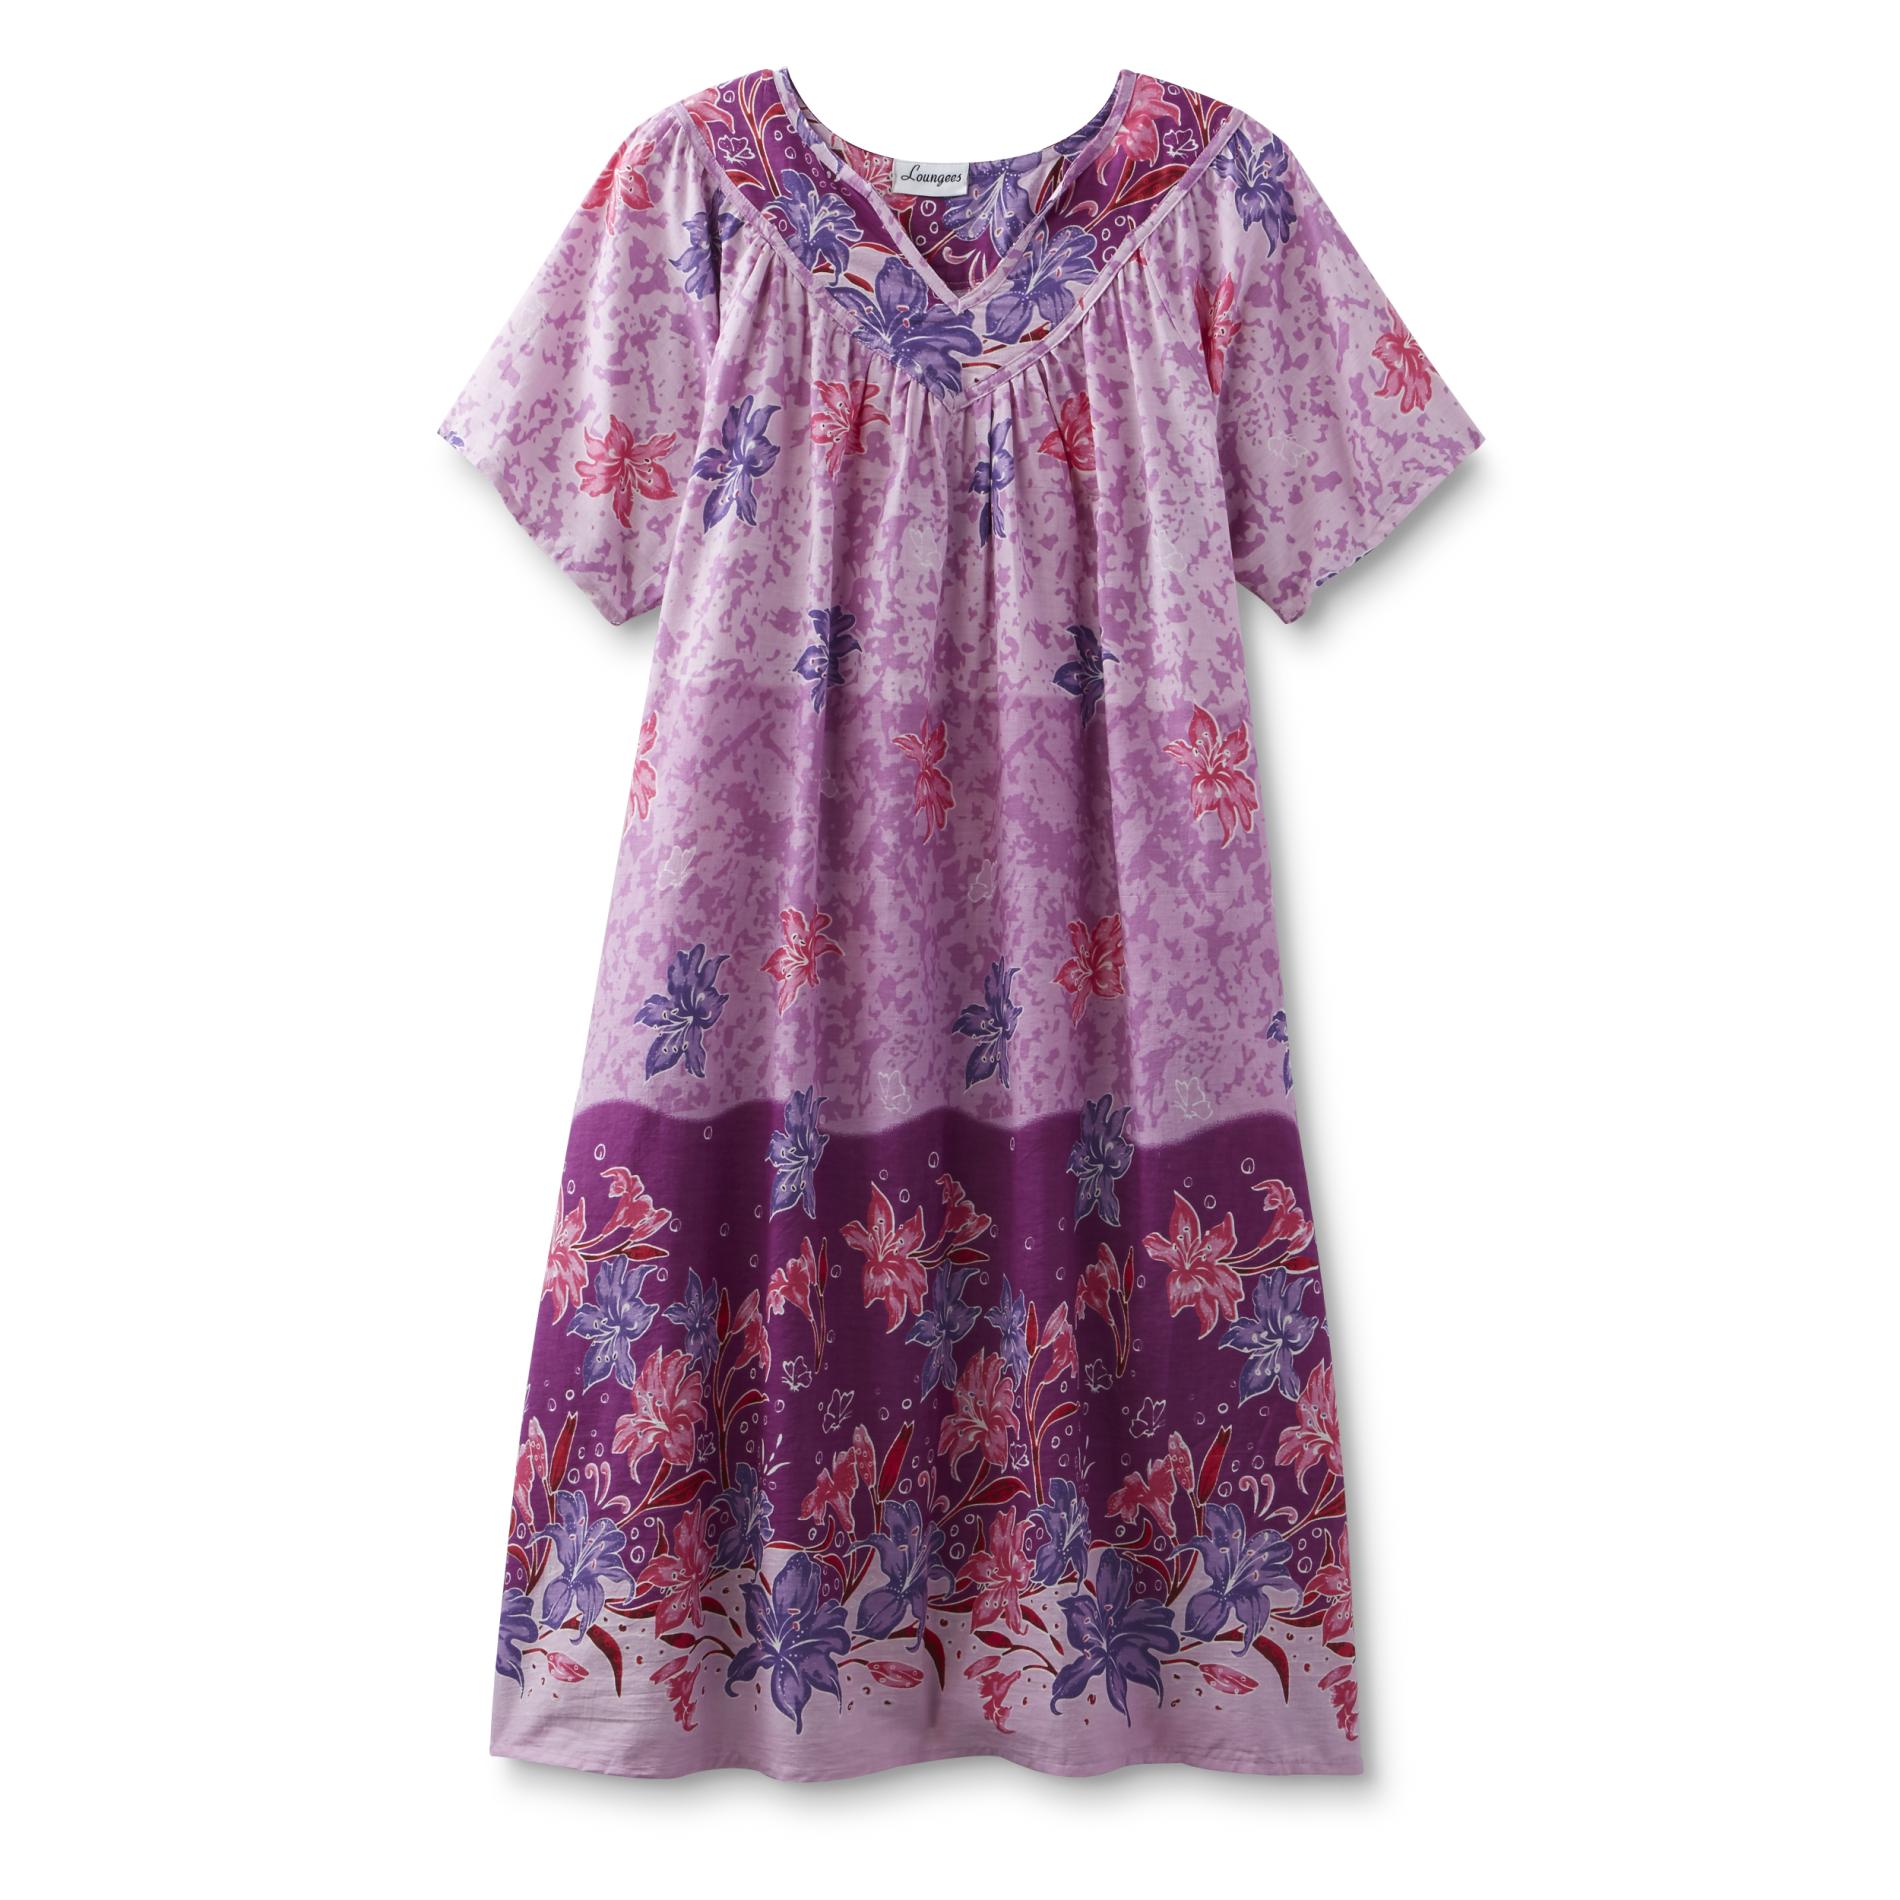 Loungees Women's Plus Nightgown - Floral